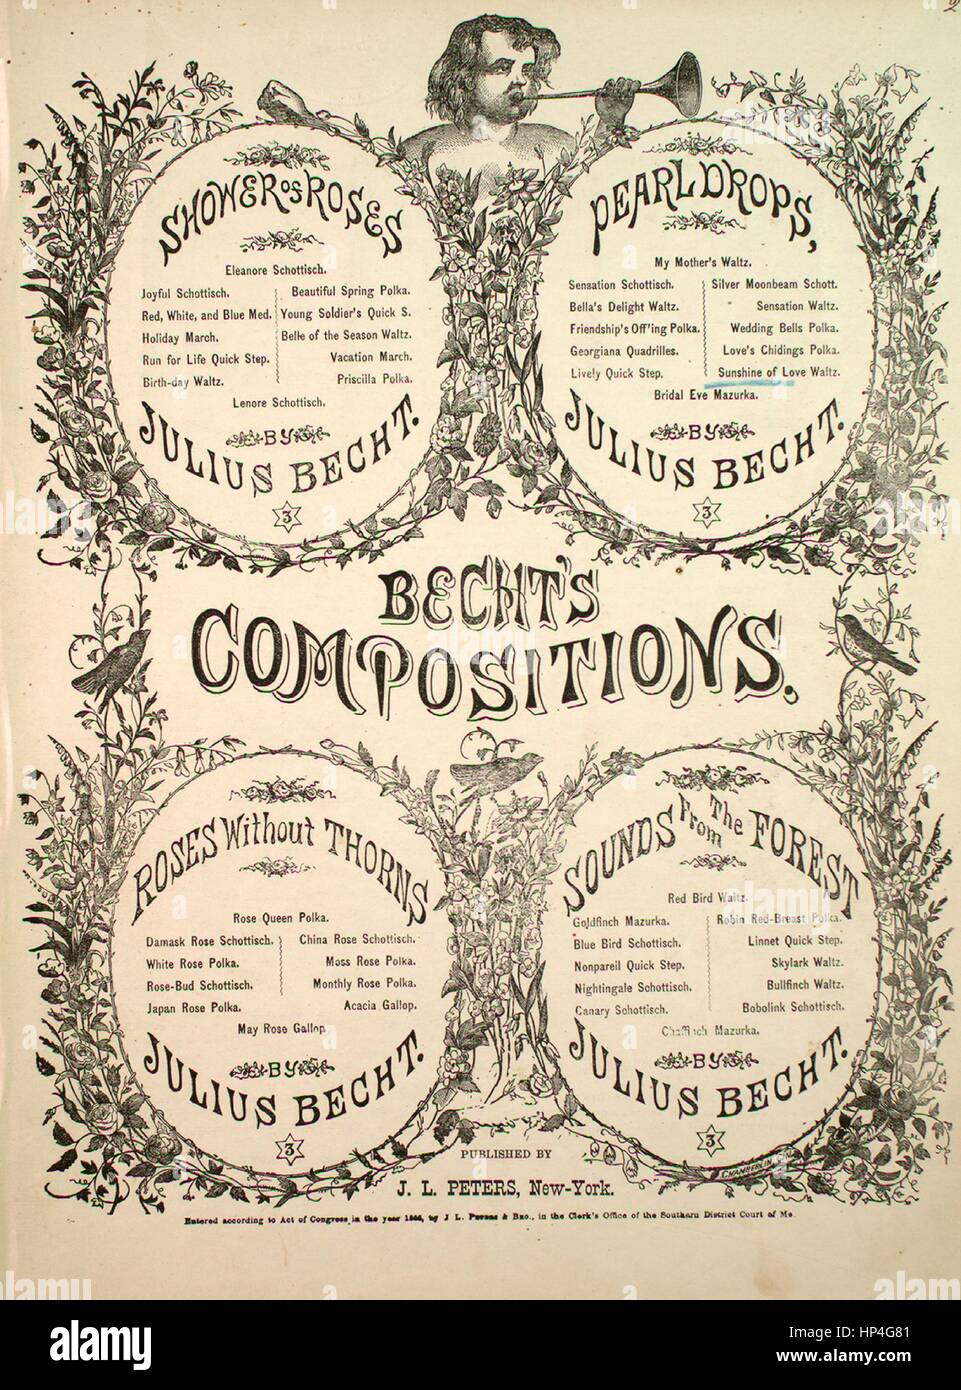 Sheet music cover image of the song 'Becht's Compositions Pearldrops Sunshine of Love Waltz', with original authorship notes reading 'by Julius Becht', United States, 1866. The publisher is listed as 'J.L. Peters', the form of composition is 'sectional', the instrumentation is 'piano', the first line reads 'None', and the illustration artist is listed as 'None'. Stock Photo